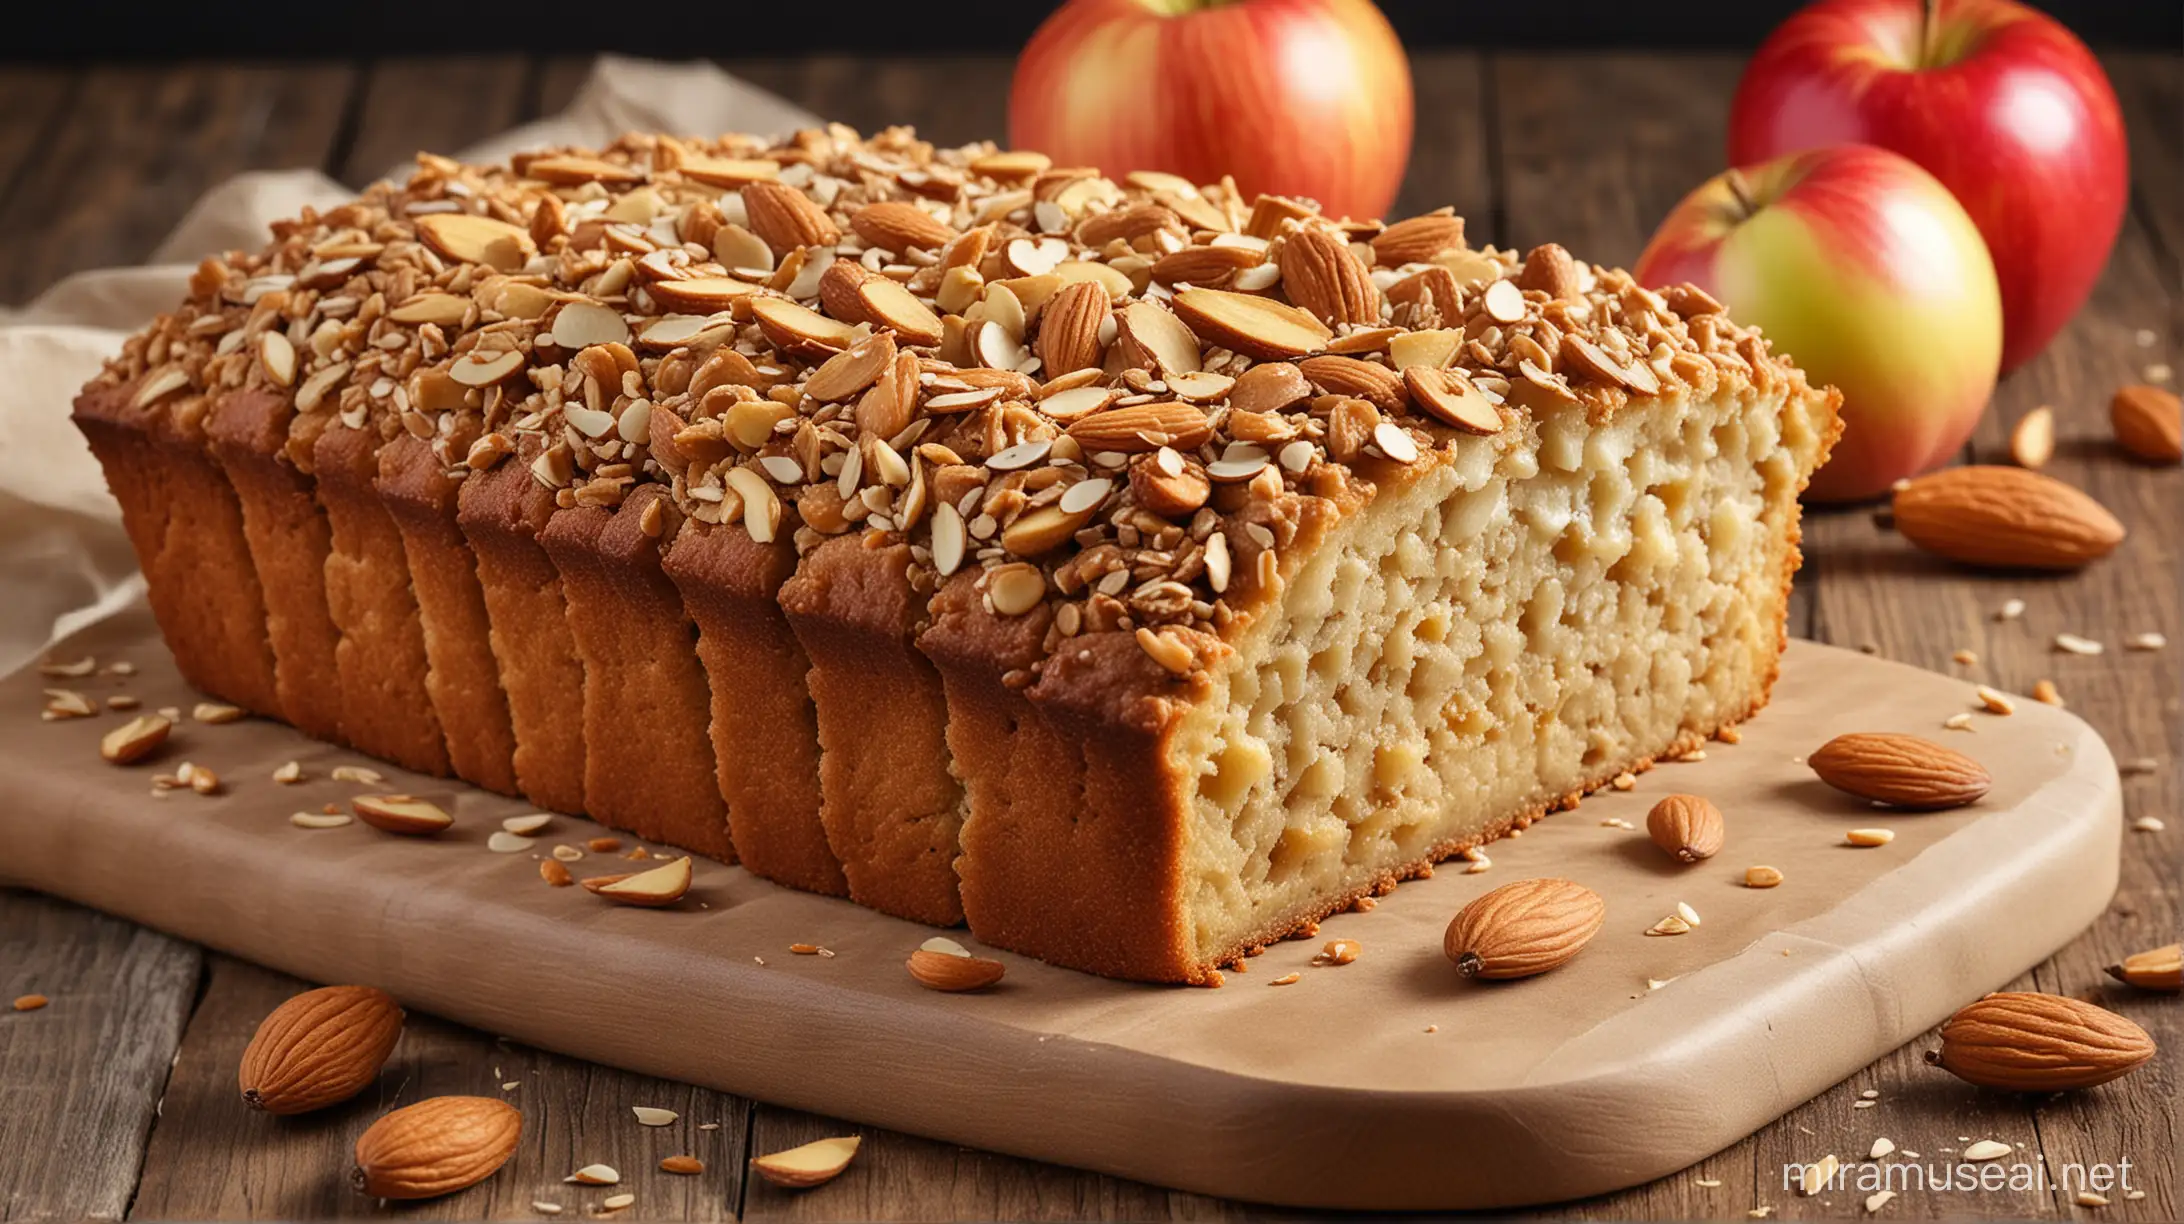 Almond crusted apple bread, real and original hd image, make detailed and professional, make background bright and professional, make close and more realistic image, make more realistic like shoot image by phone's camera, give look like home made recipe not like restaurant